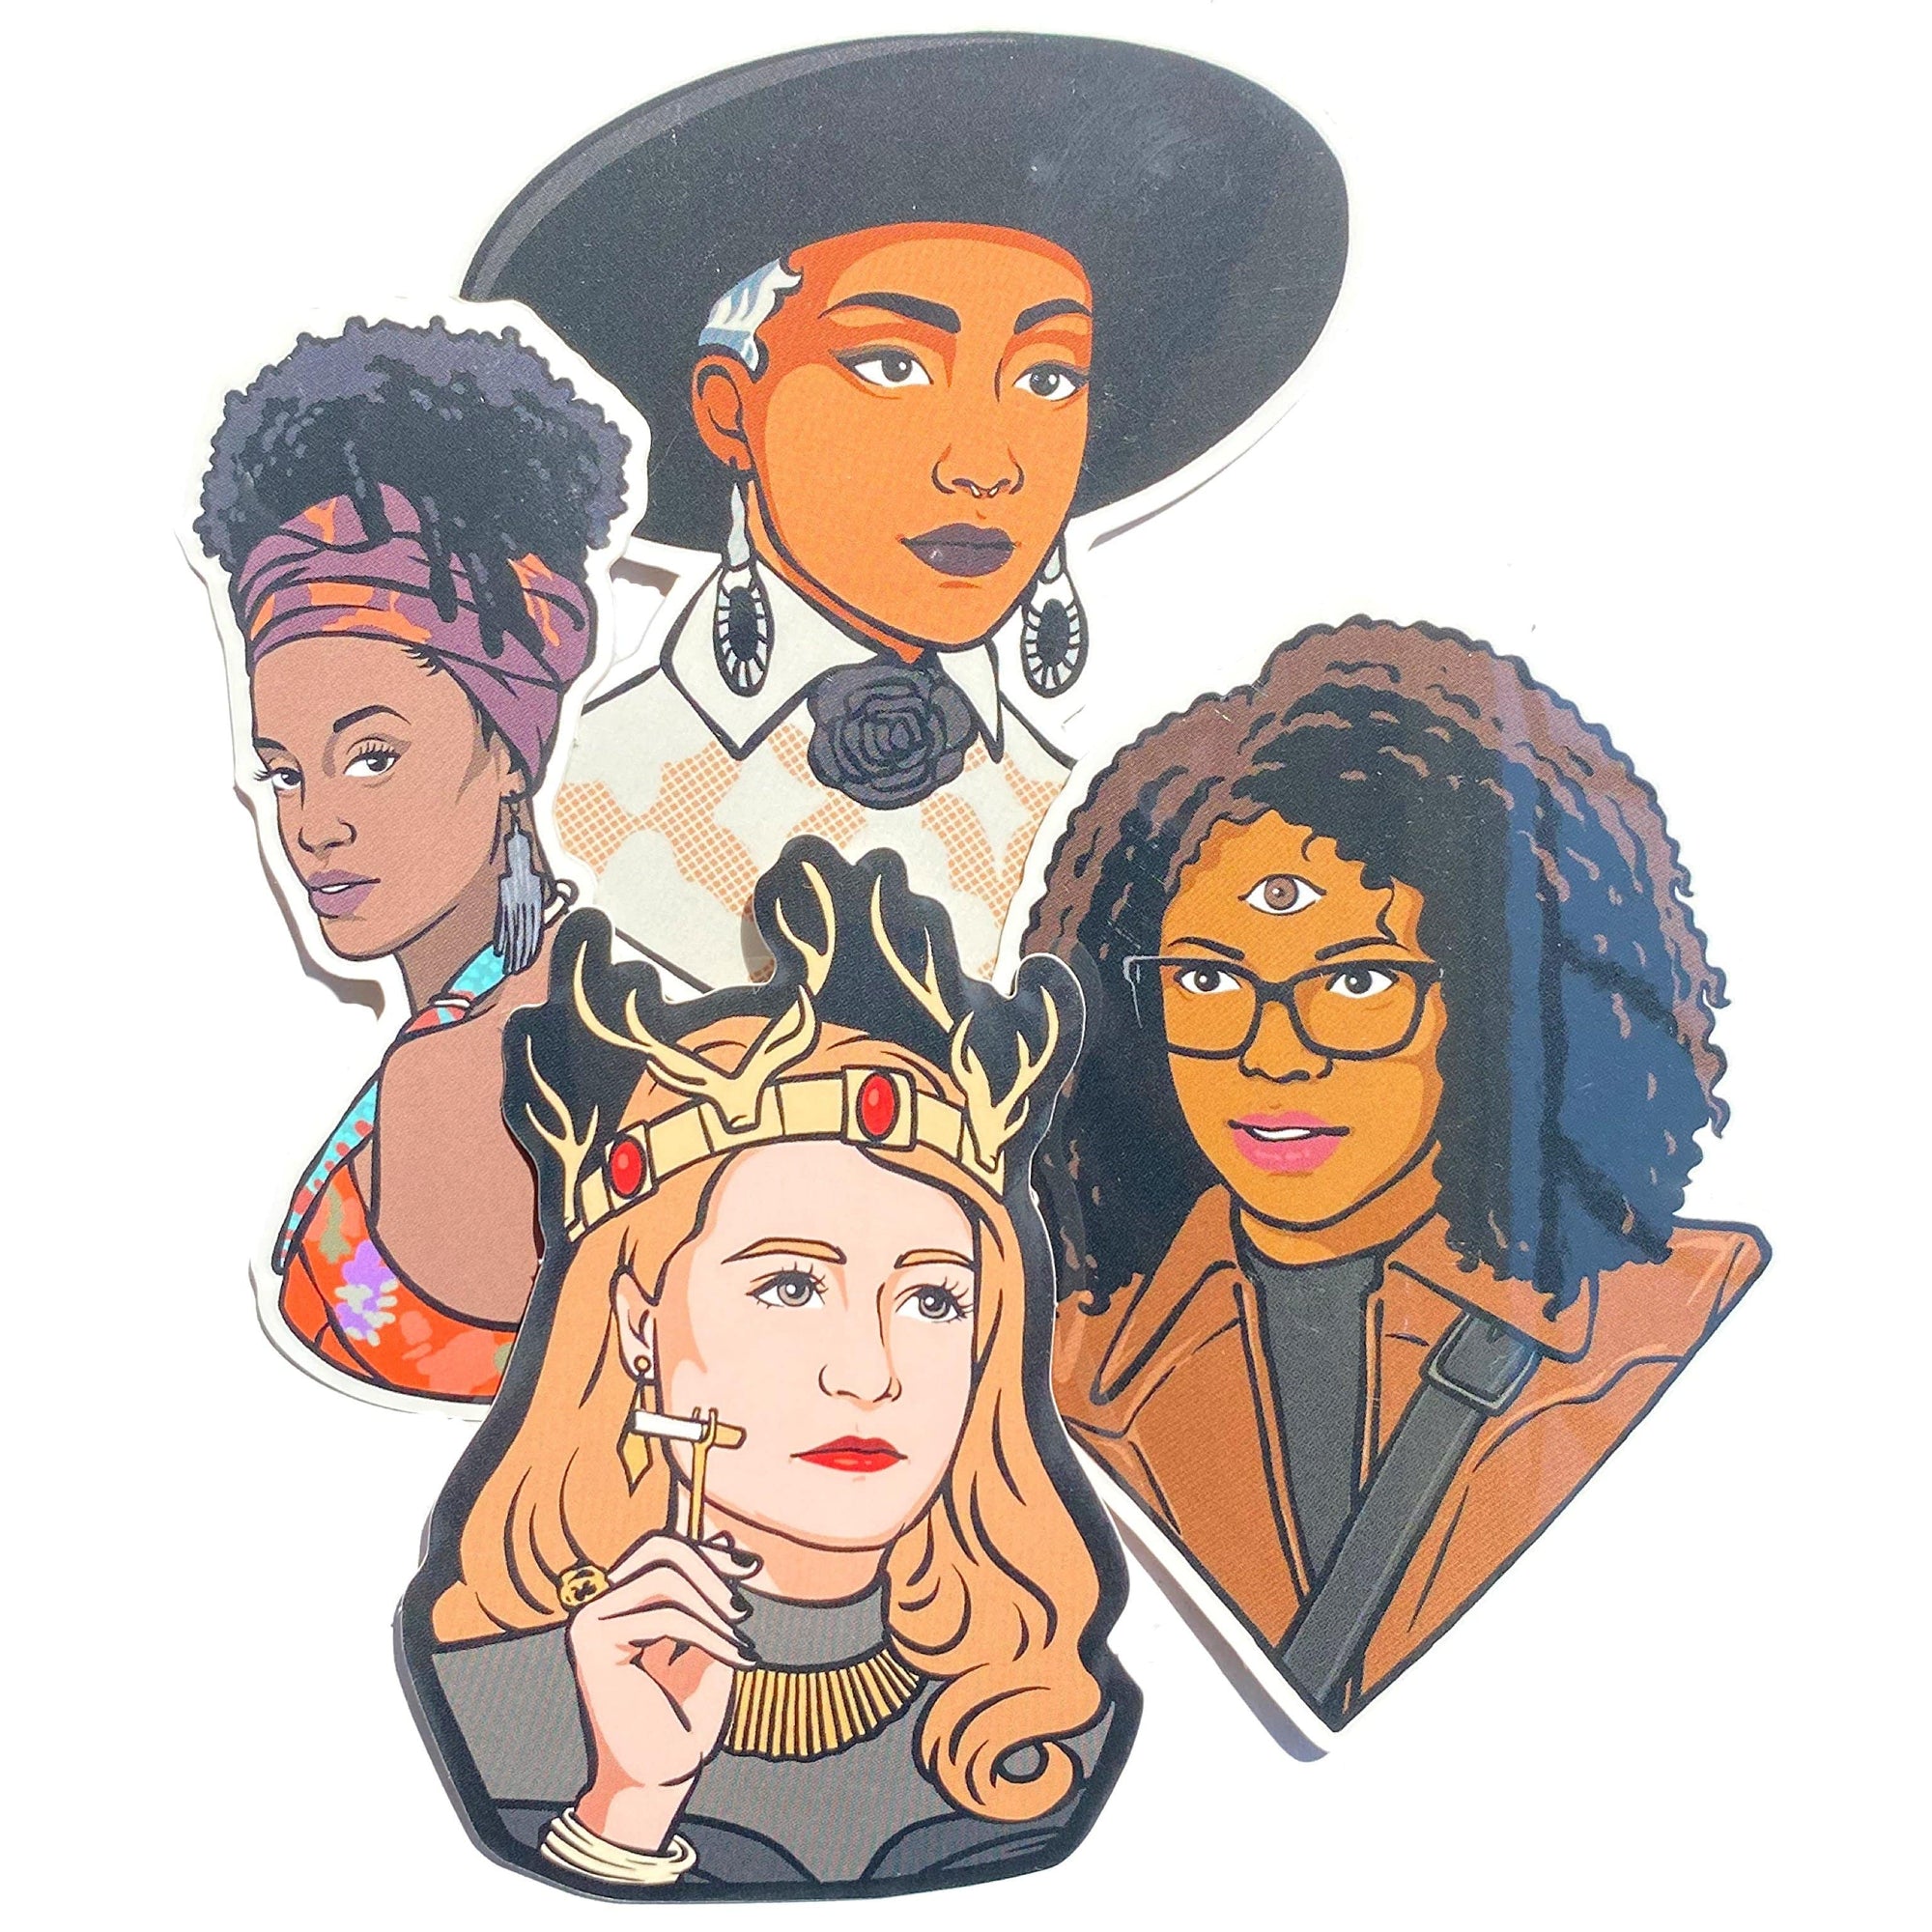 The New Weird Sisters 4 sticker pack